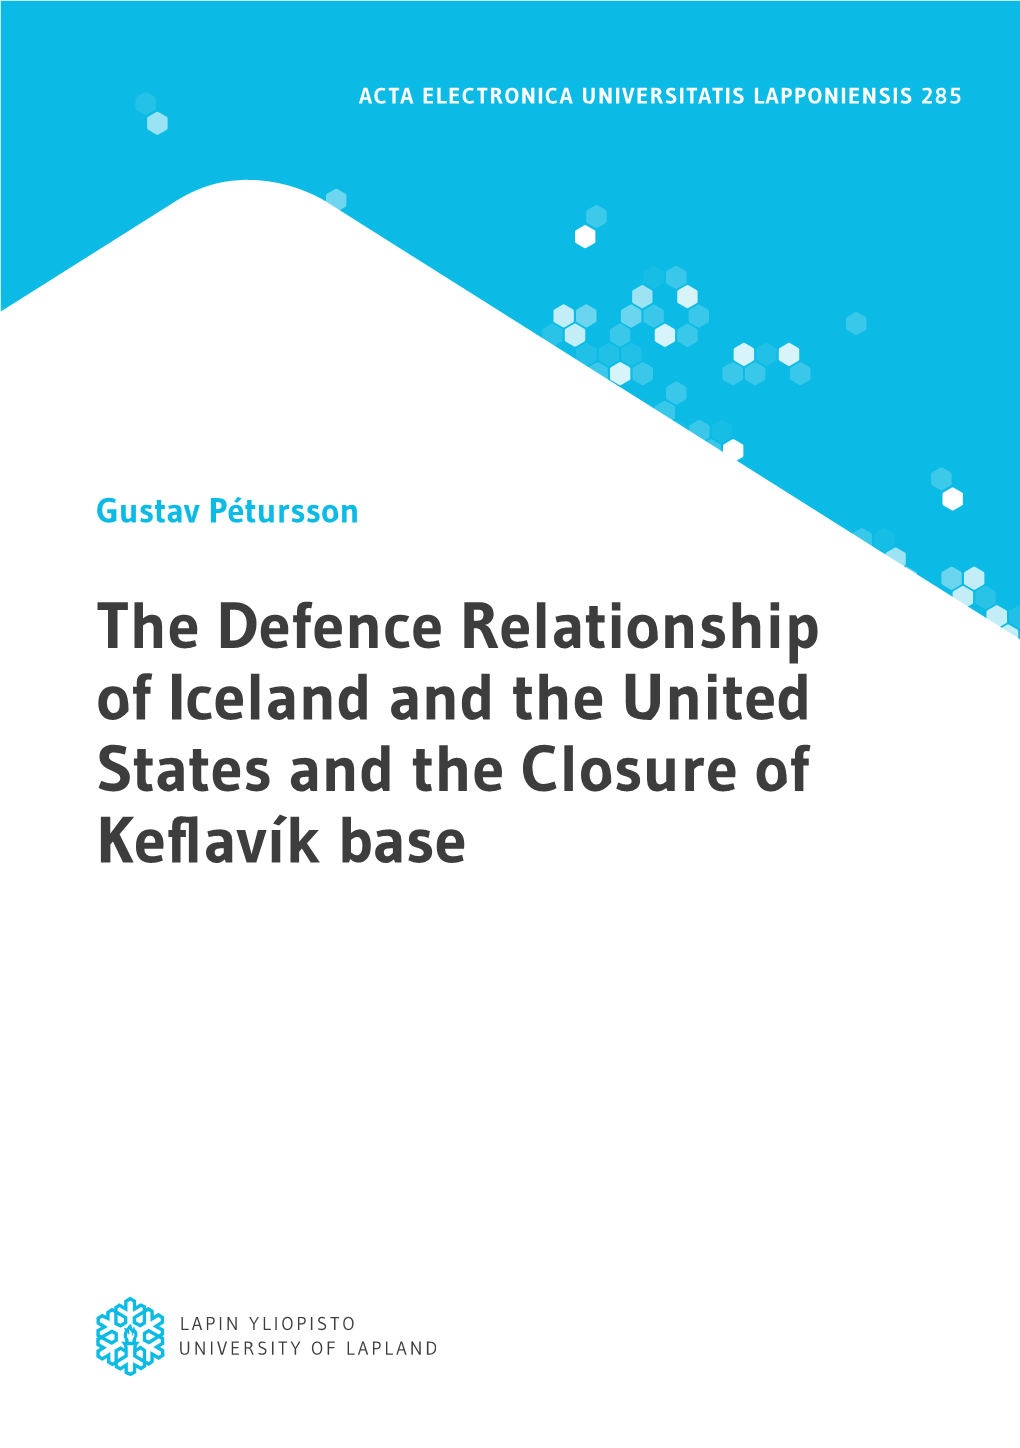 The Defence Relationship of Iceland and the United States and the Closure of Keflavík Base